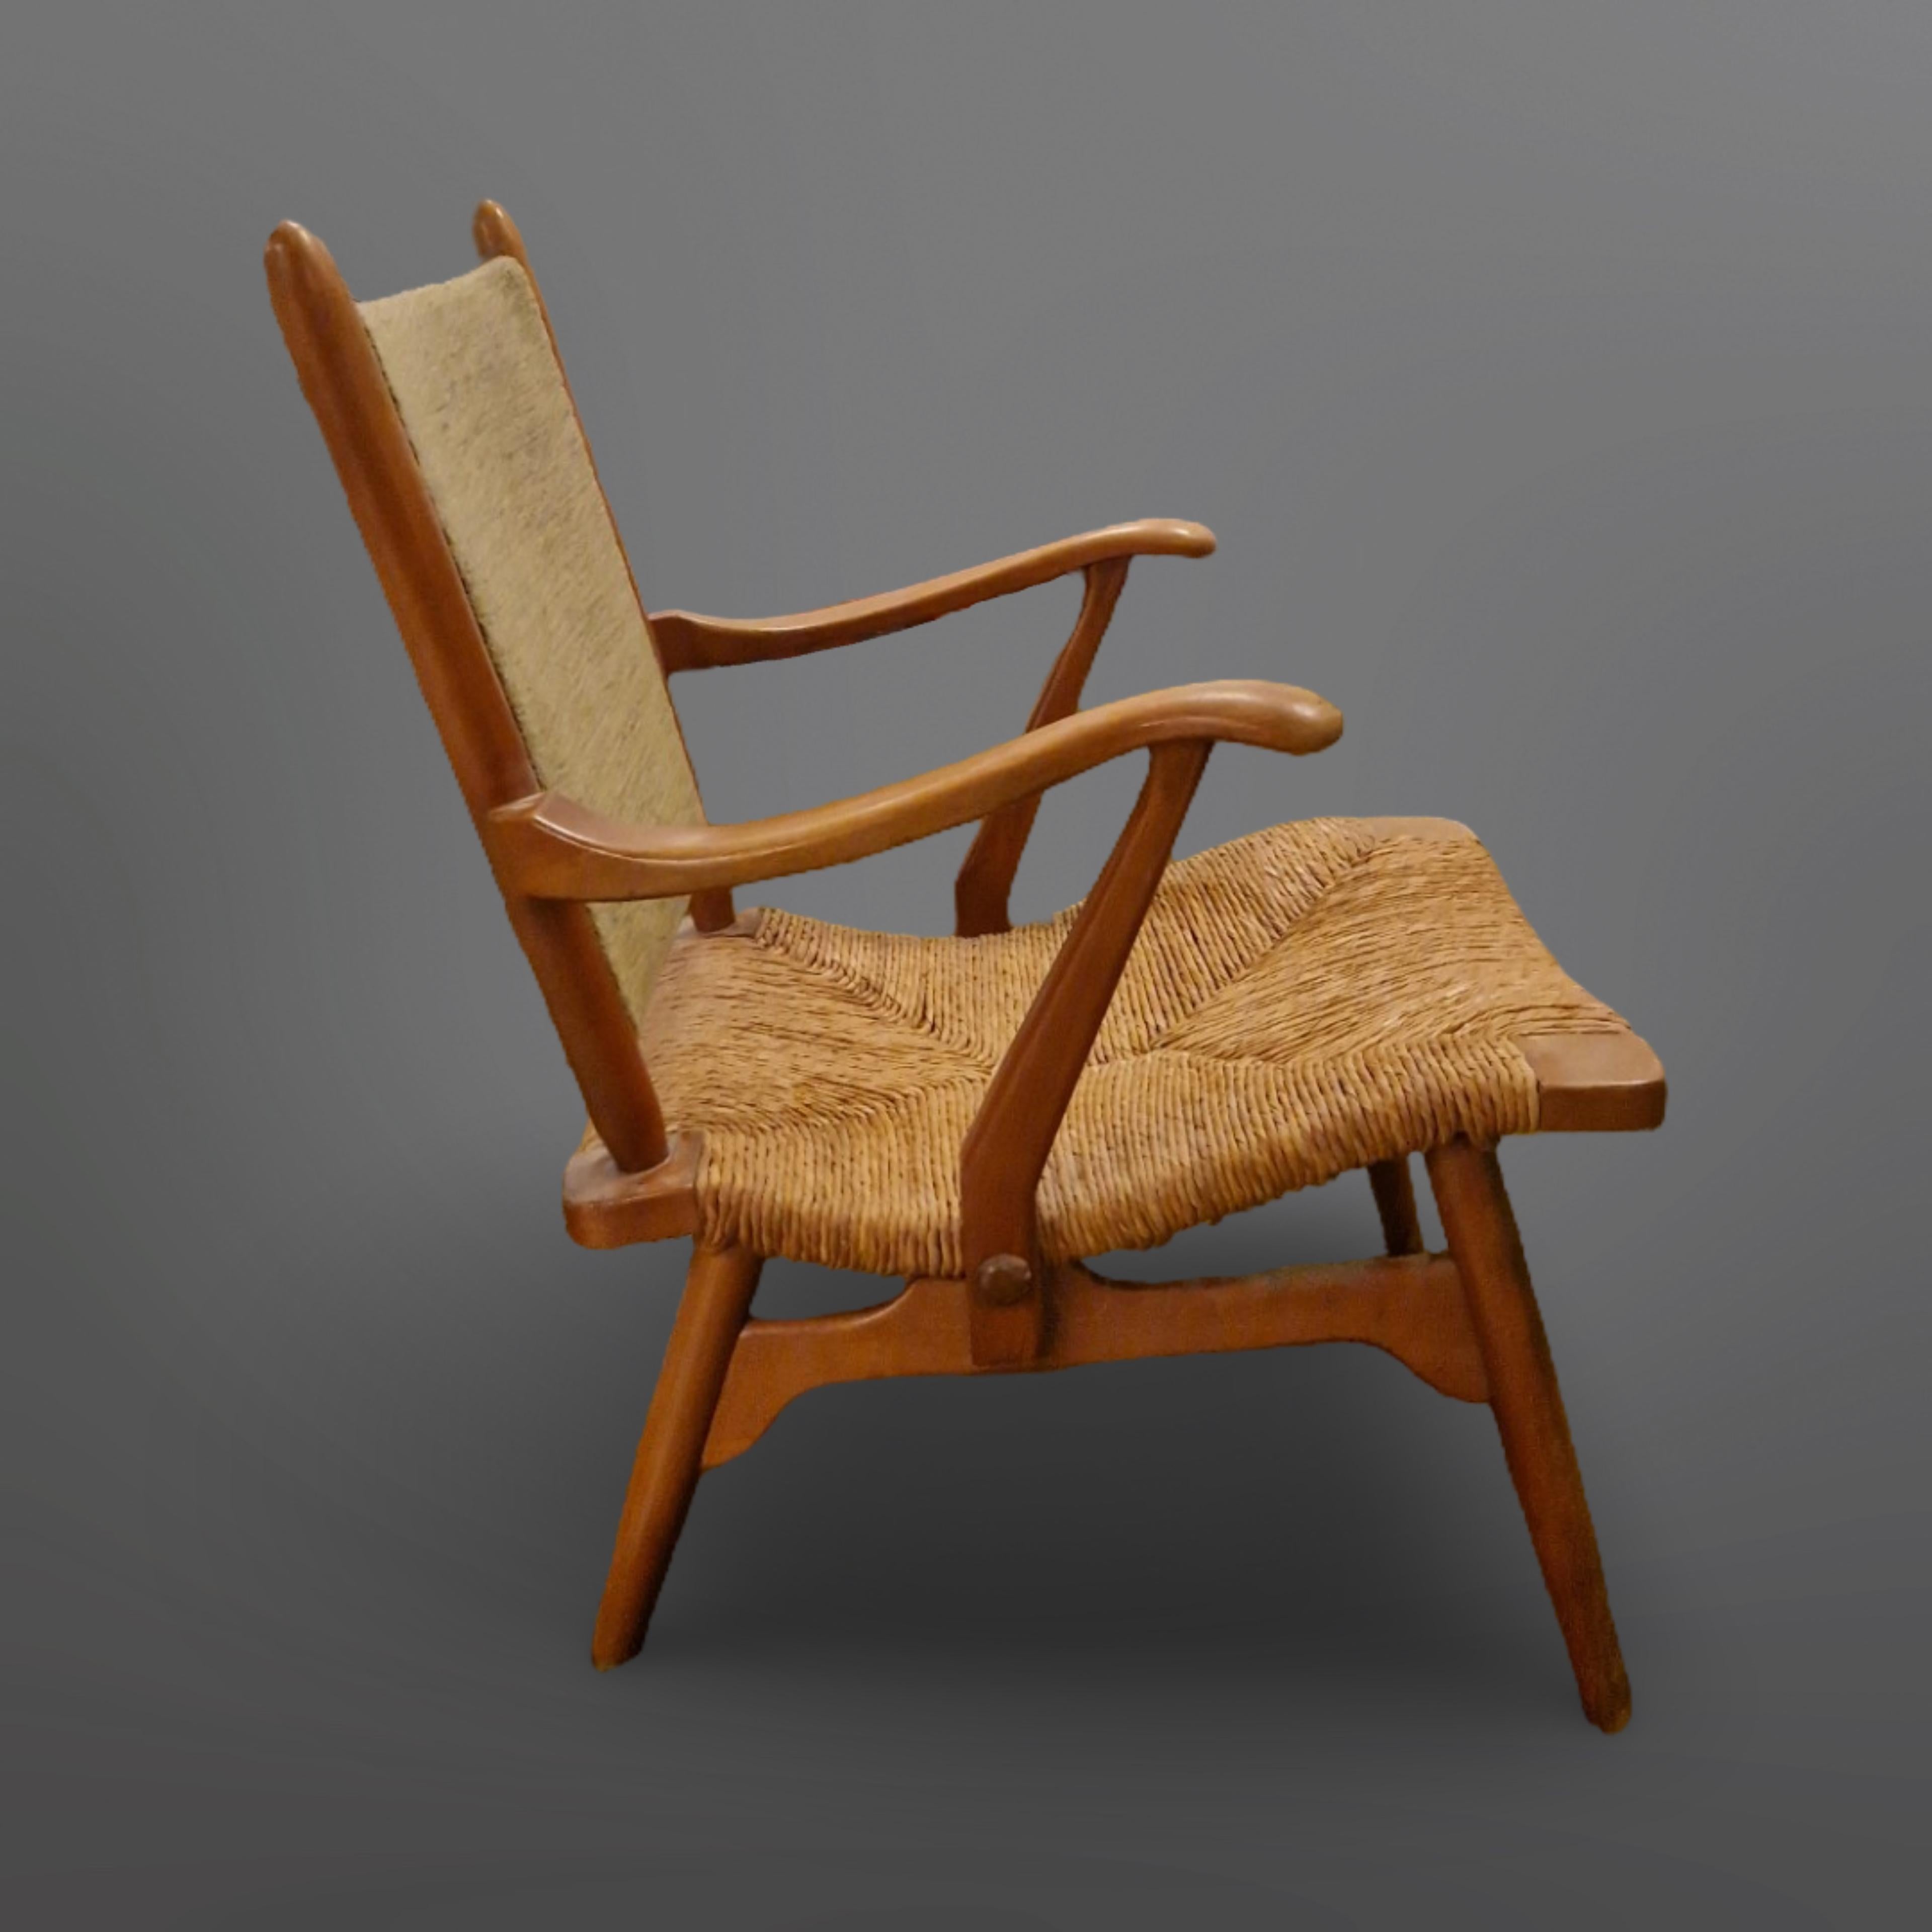 Early 1950s lounge chair. The frame is made from wood with a fabric upholstered back and hand woven rush seat. 
Made by Dutch company 